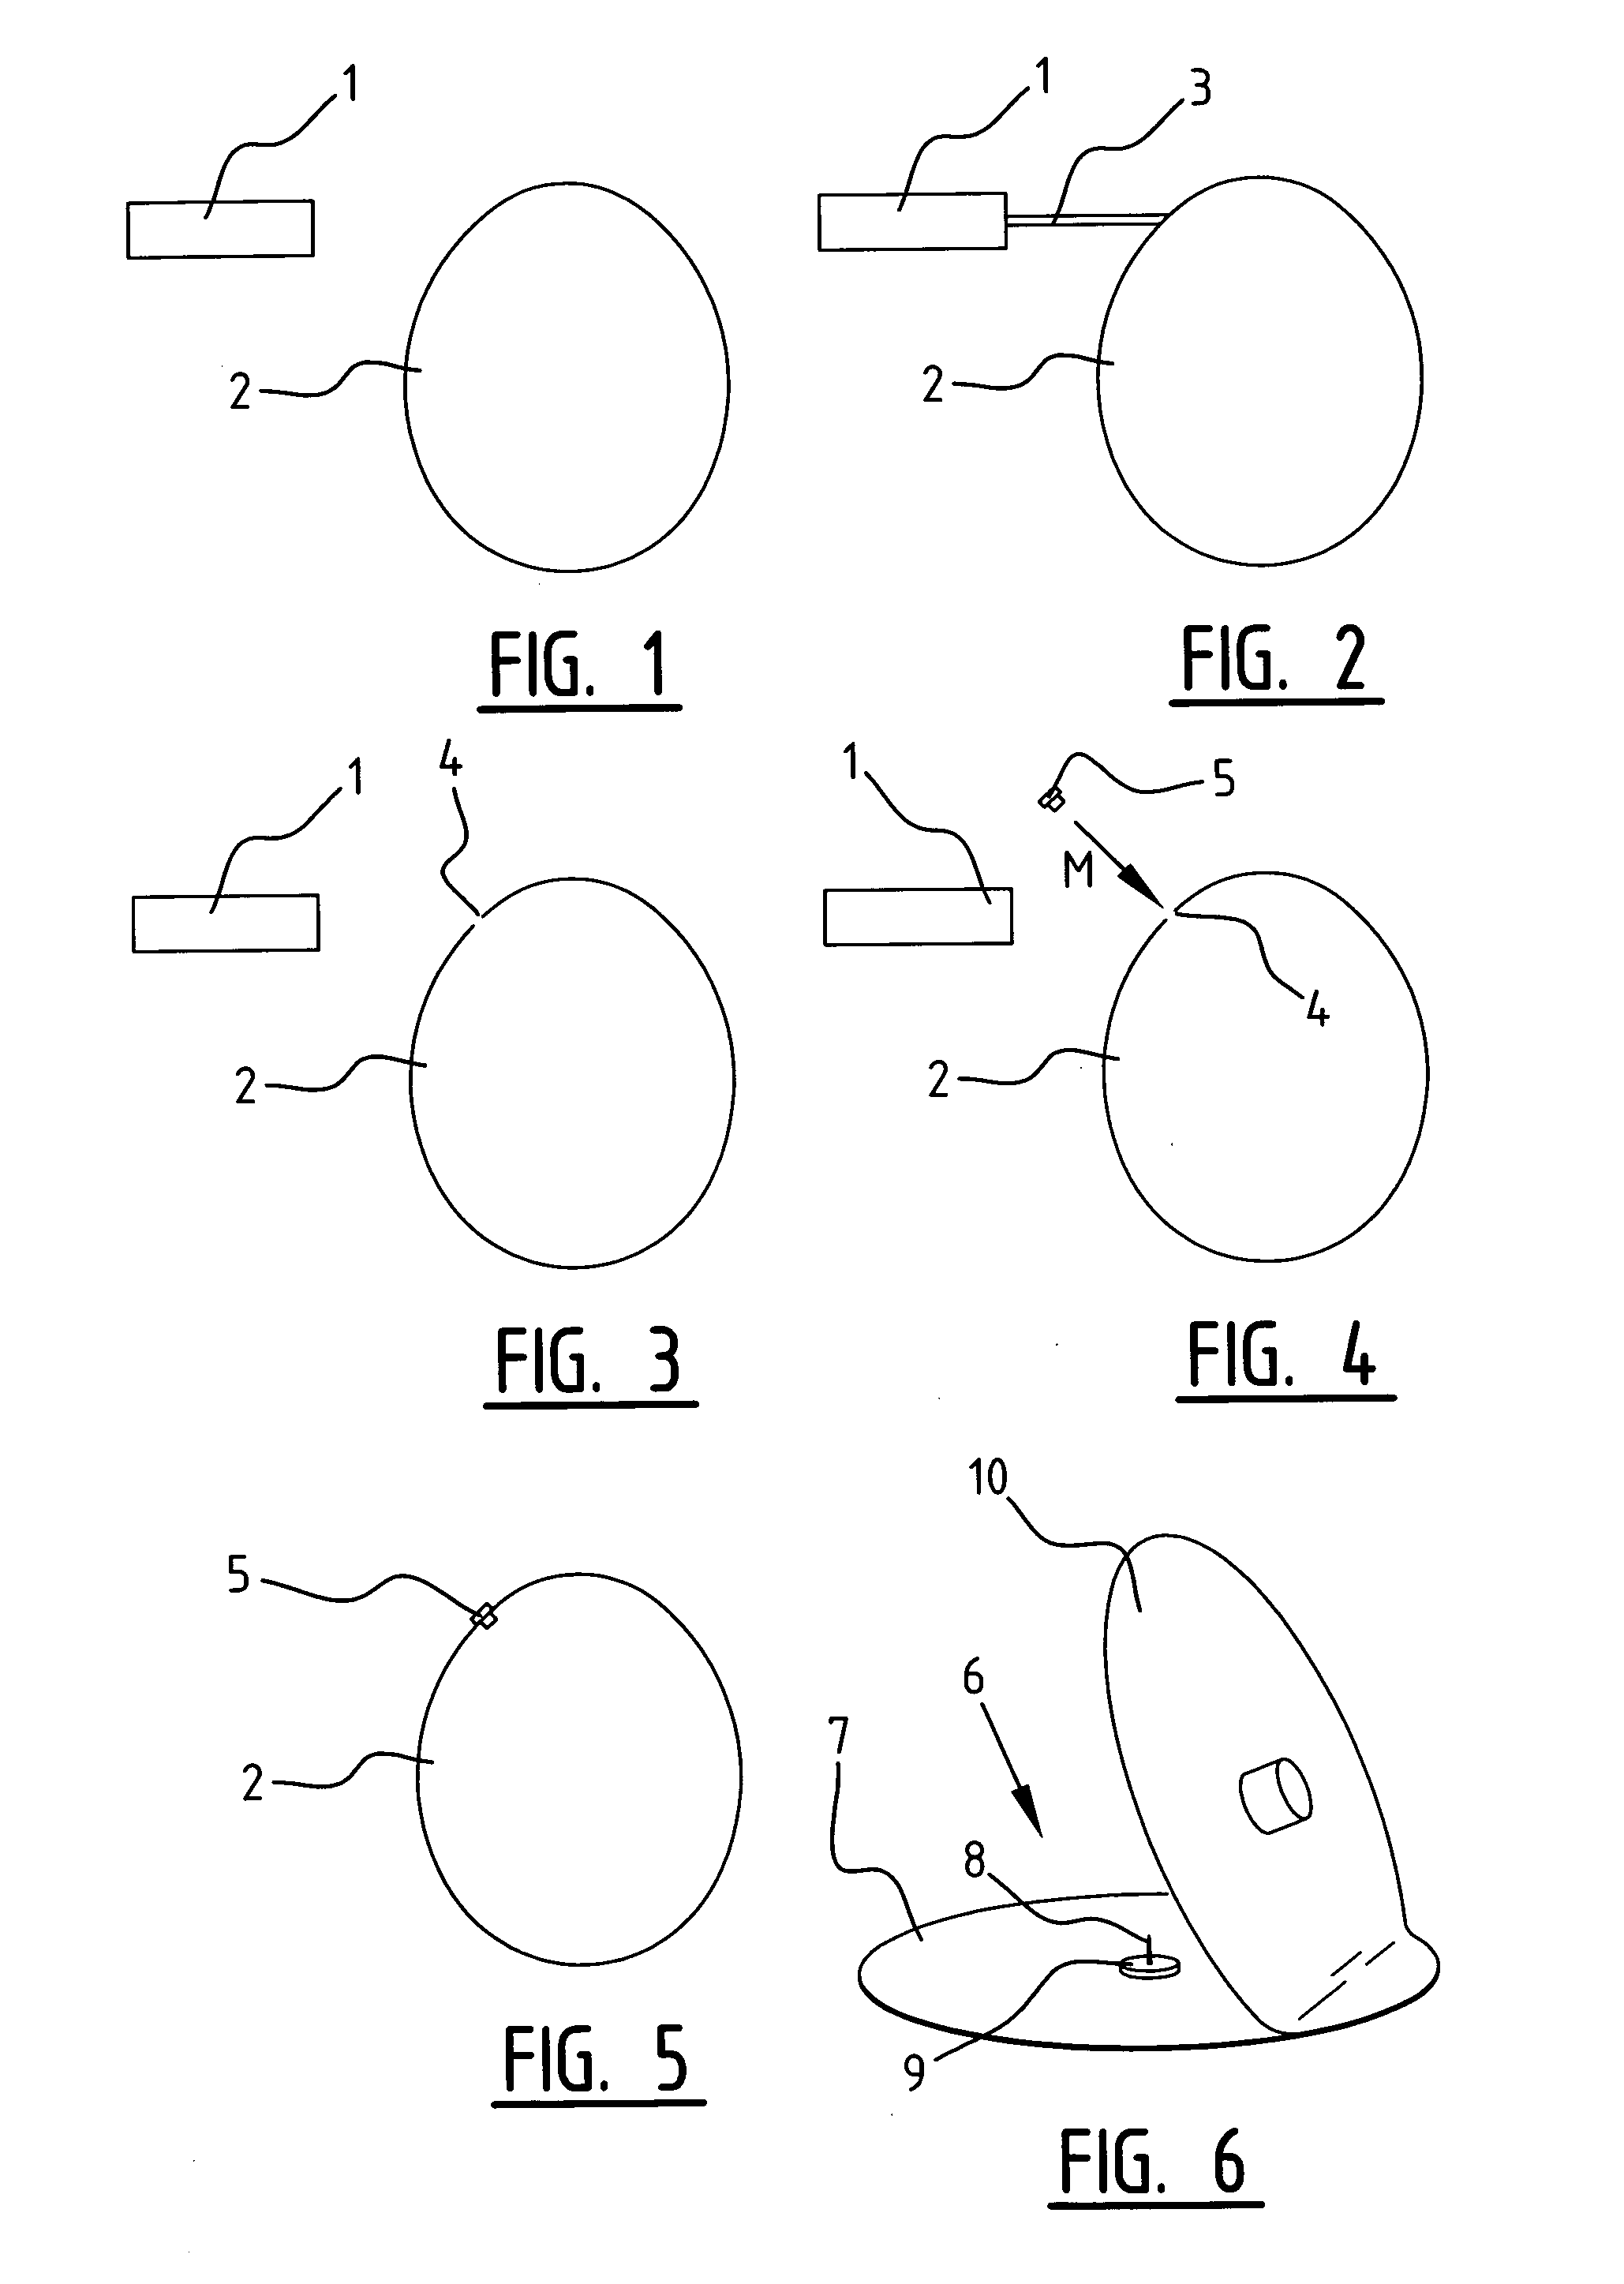 Method for preparing an invasive test of an egg and for determining a gender of an embryo in an egg